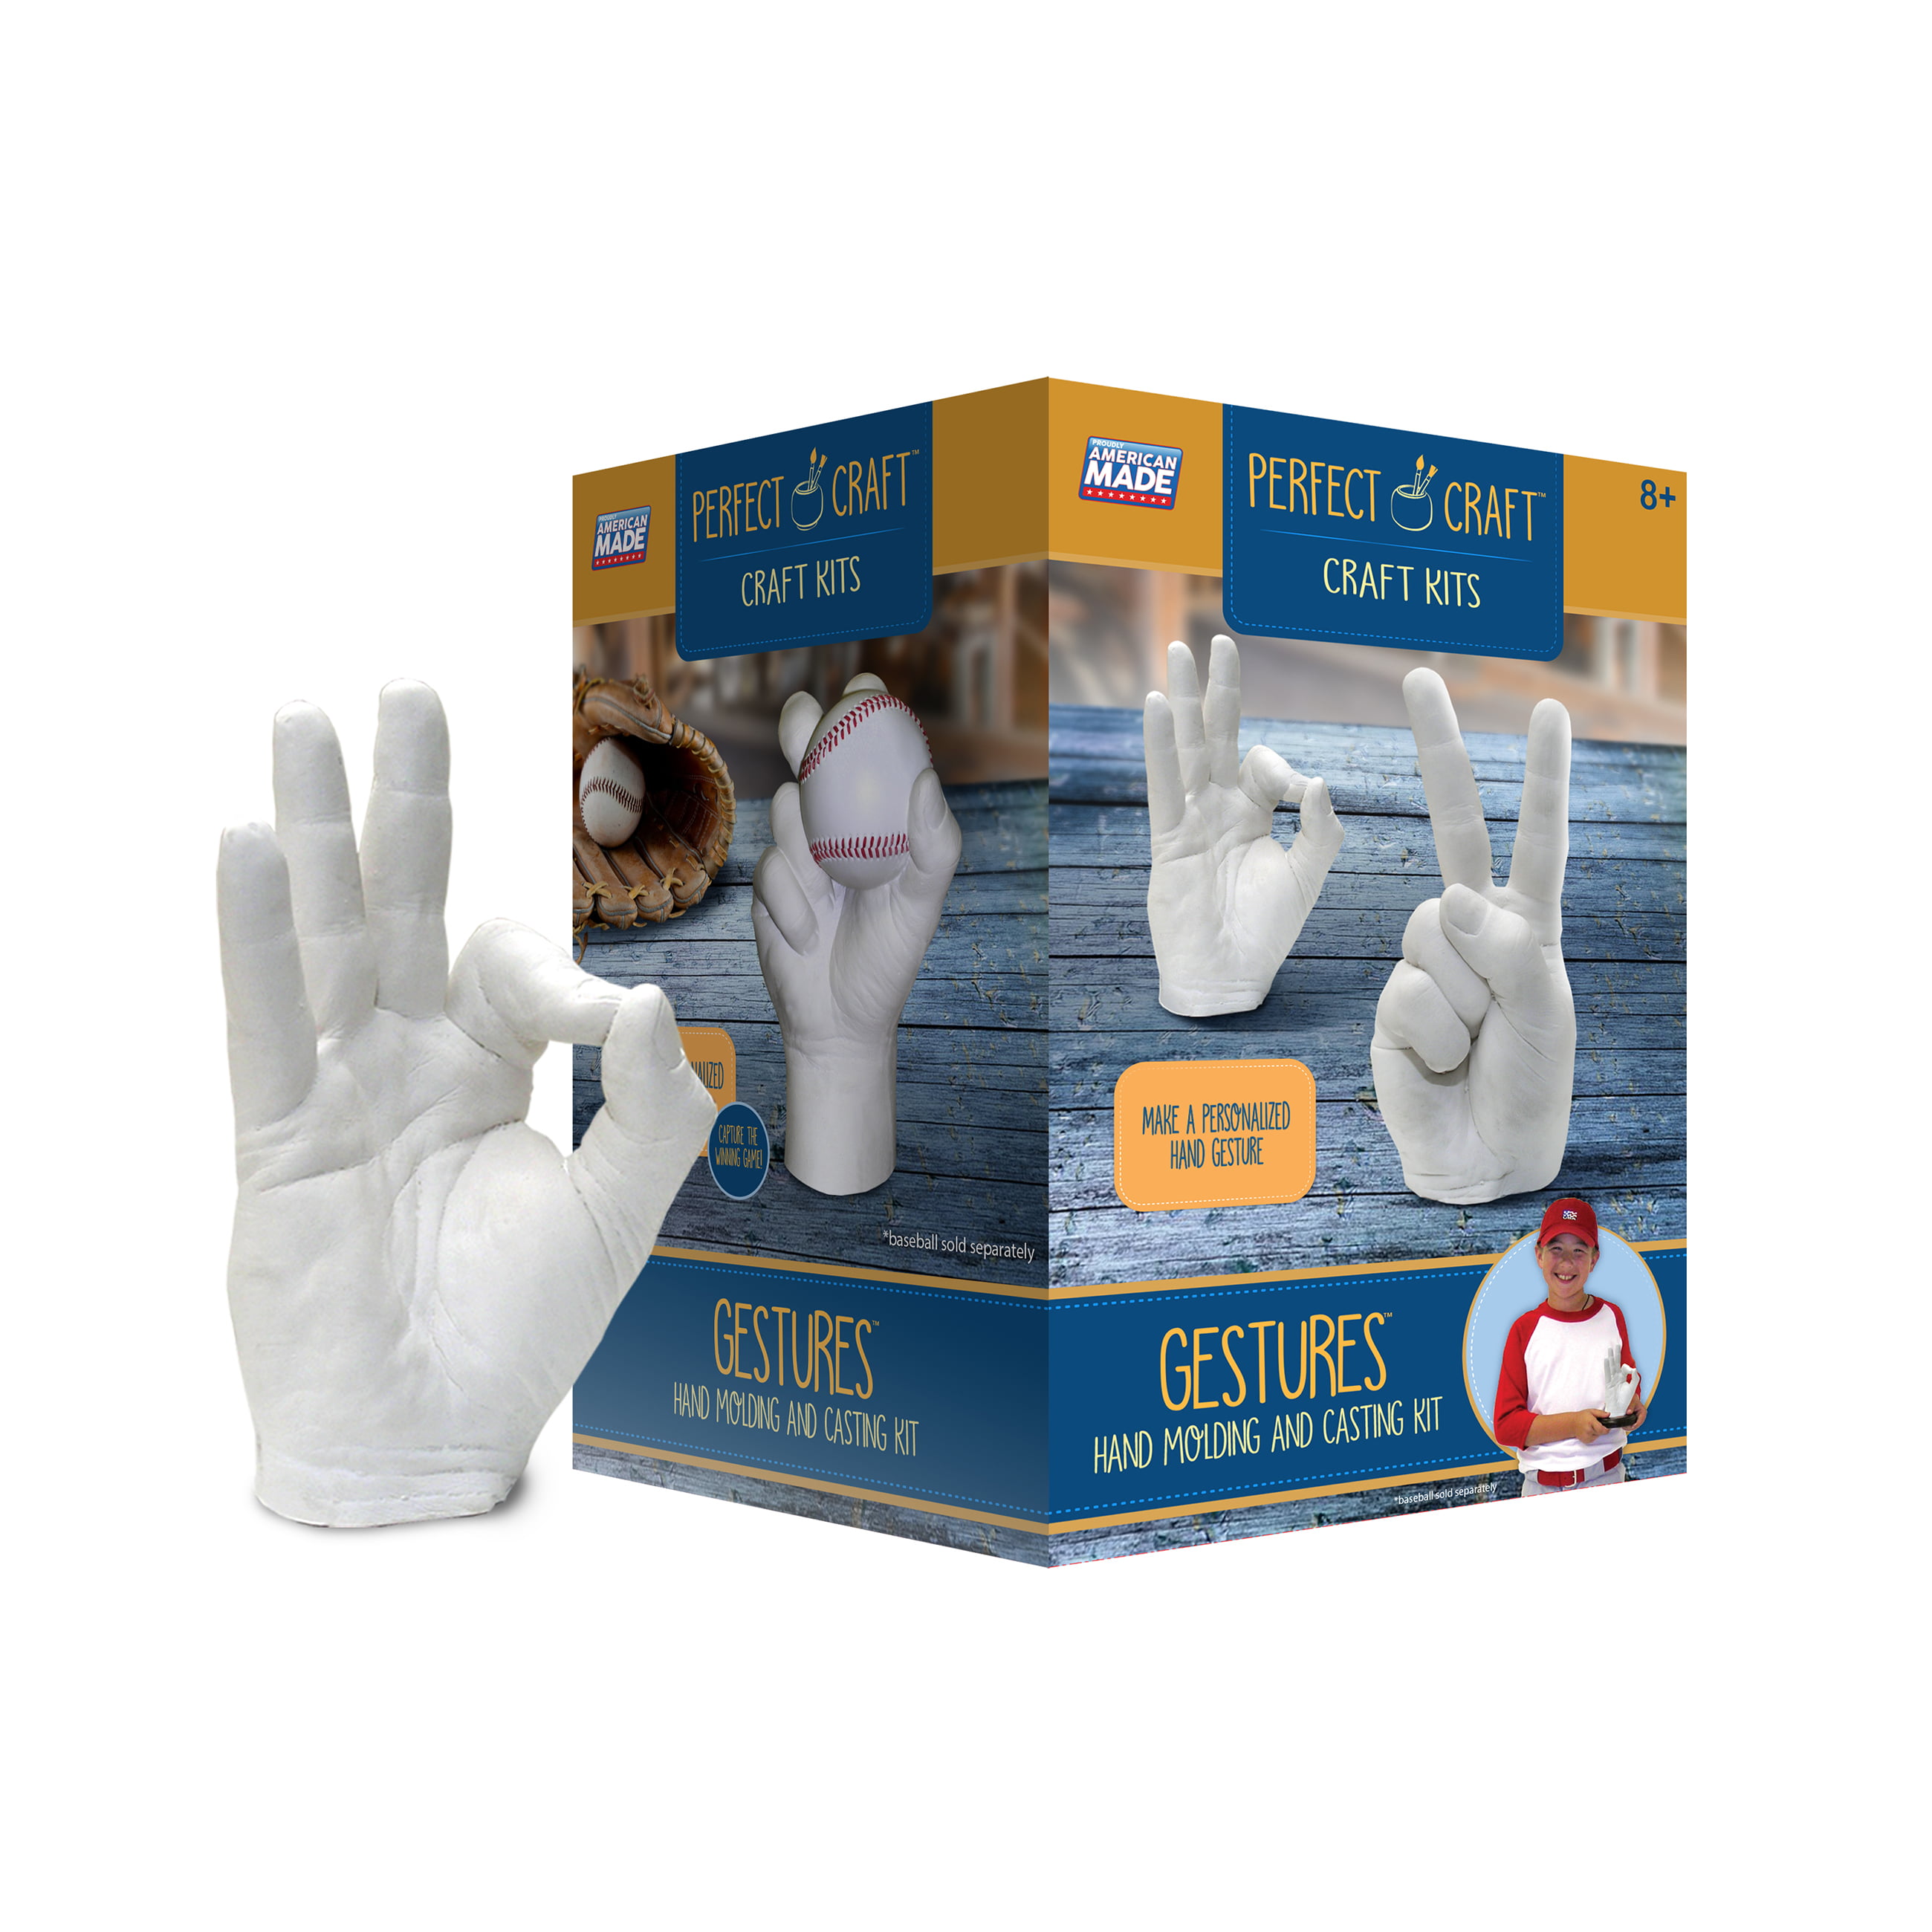 Hotbest Hand Casting Kit with Gloves, Paints & Tools Included - Most Complete Hand Molding Kit Available - Casting Kit, Size: Upgraded Version